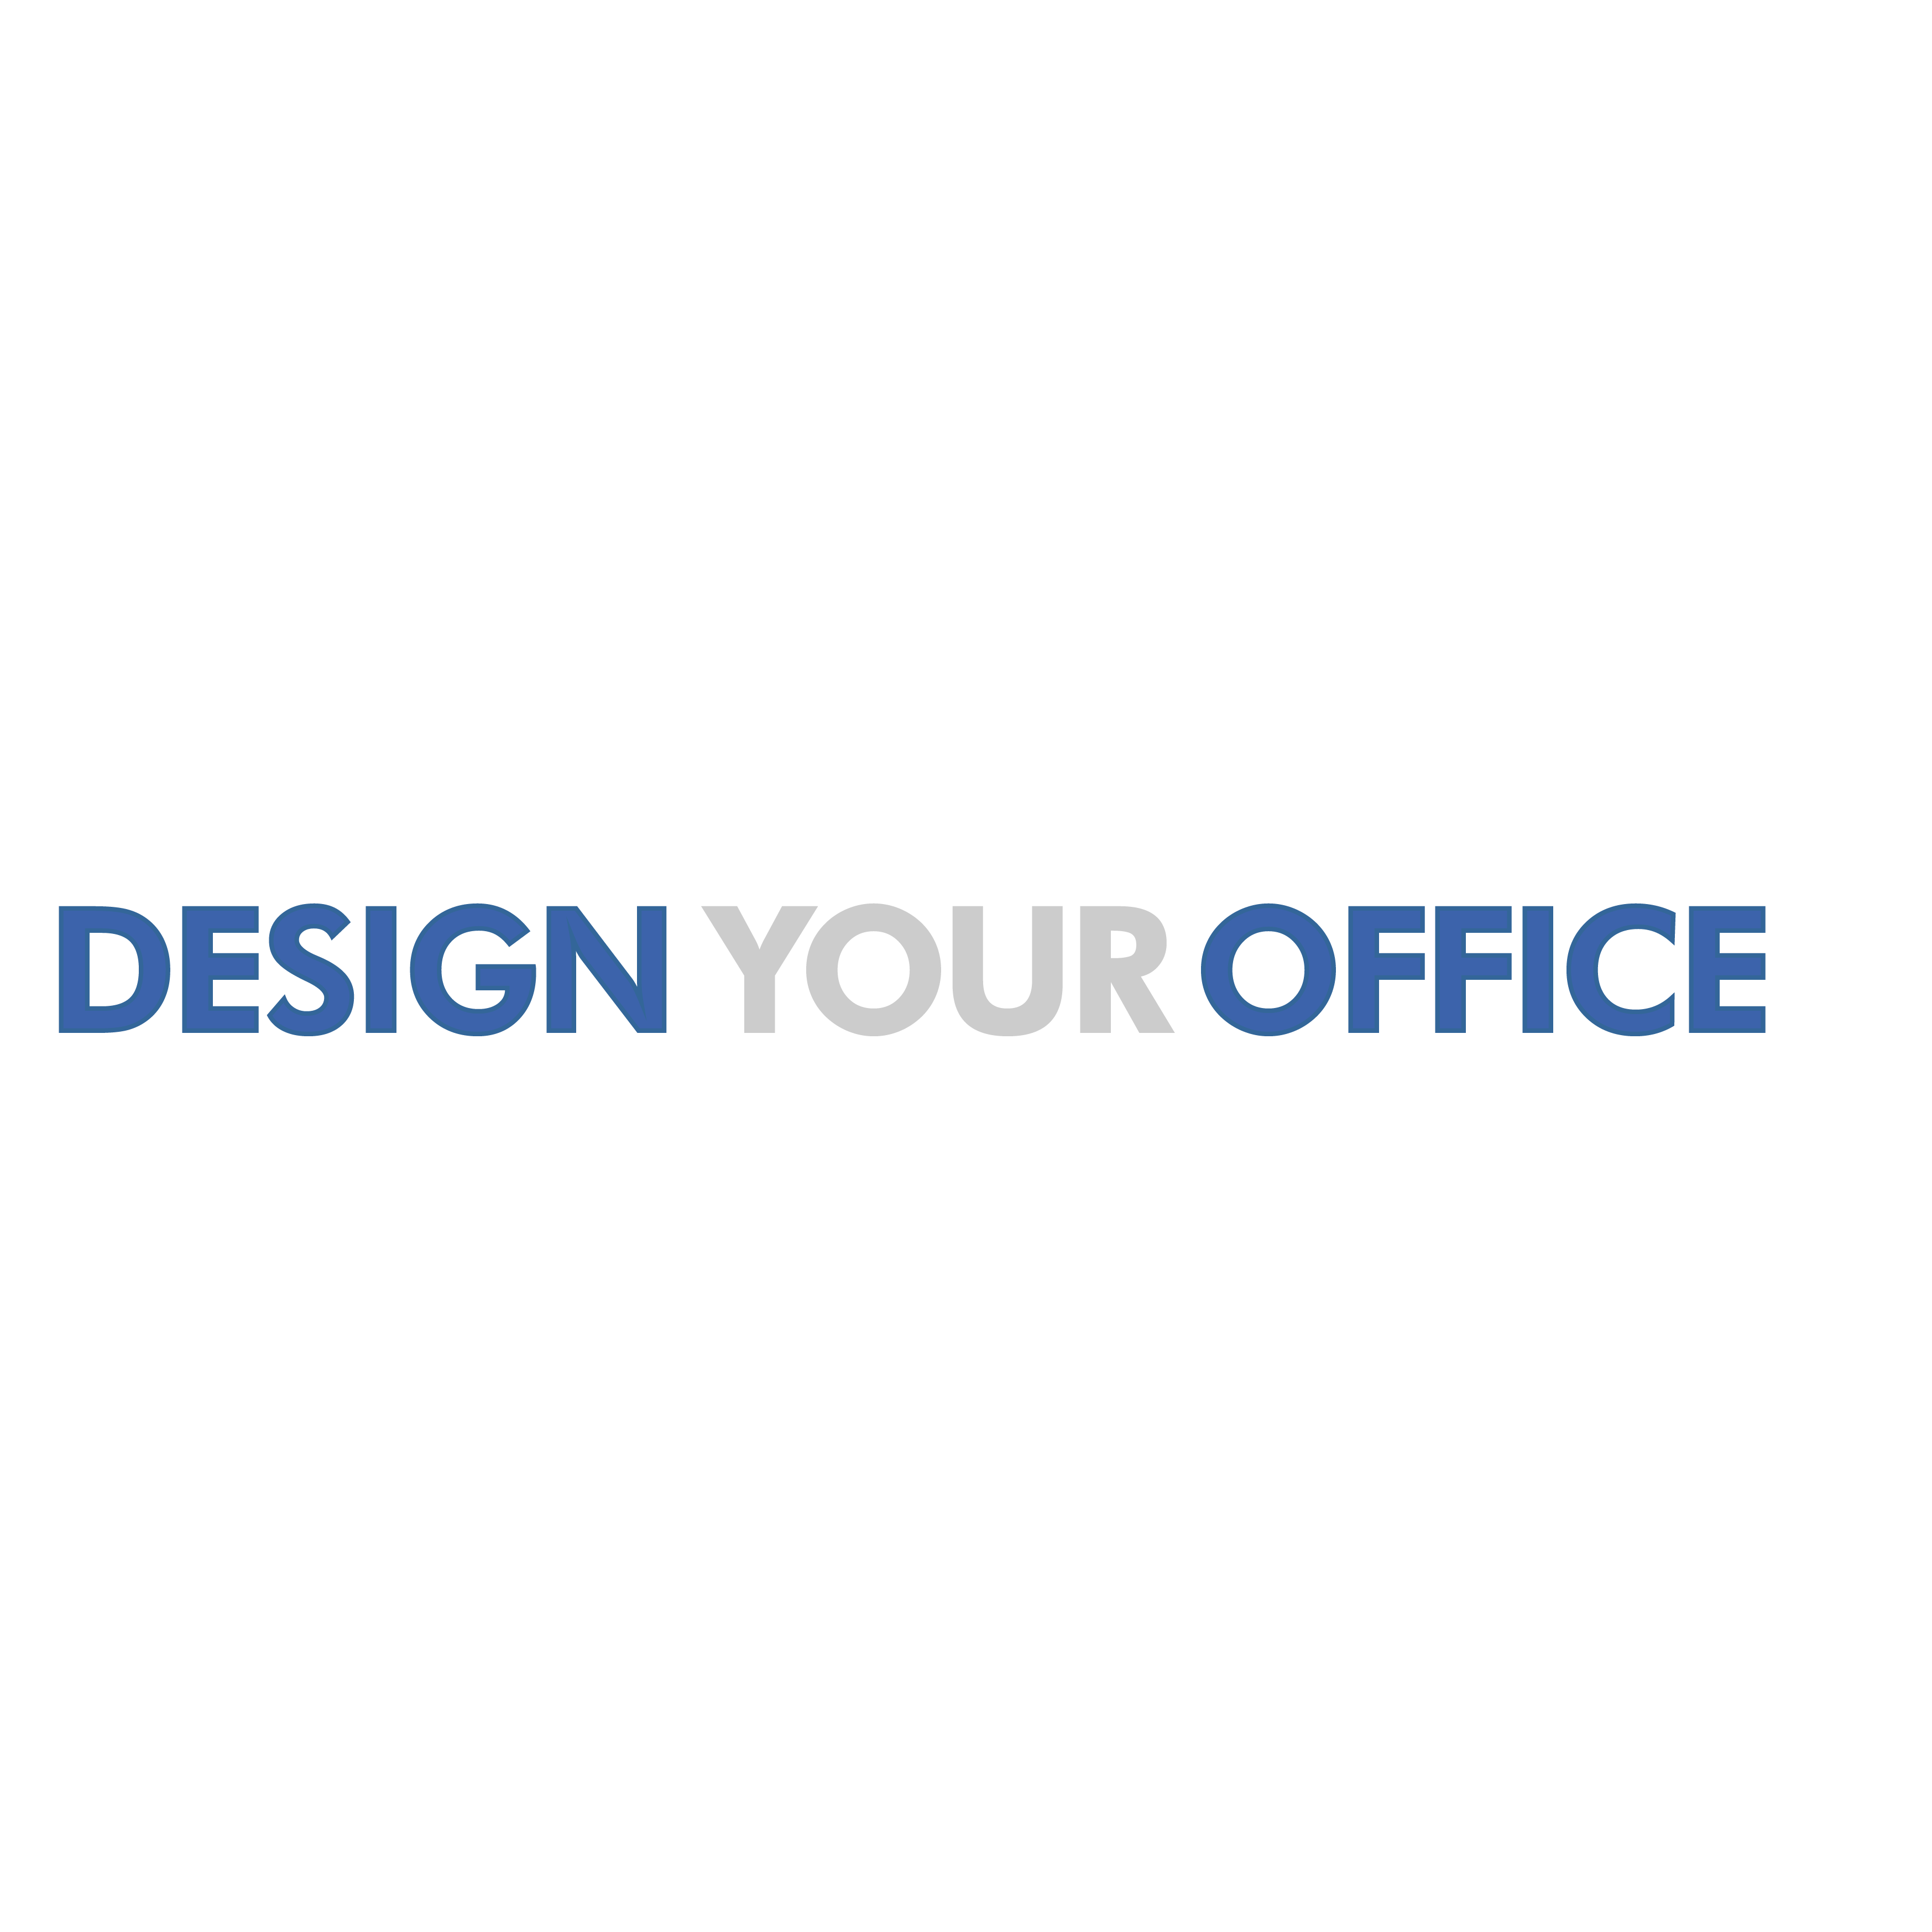 Logo Design Your Office A•I•M GmbH